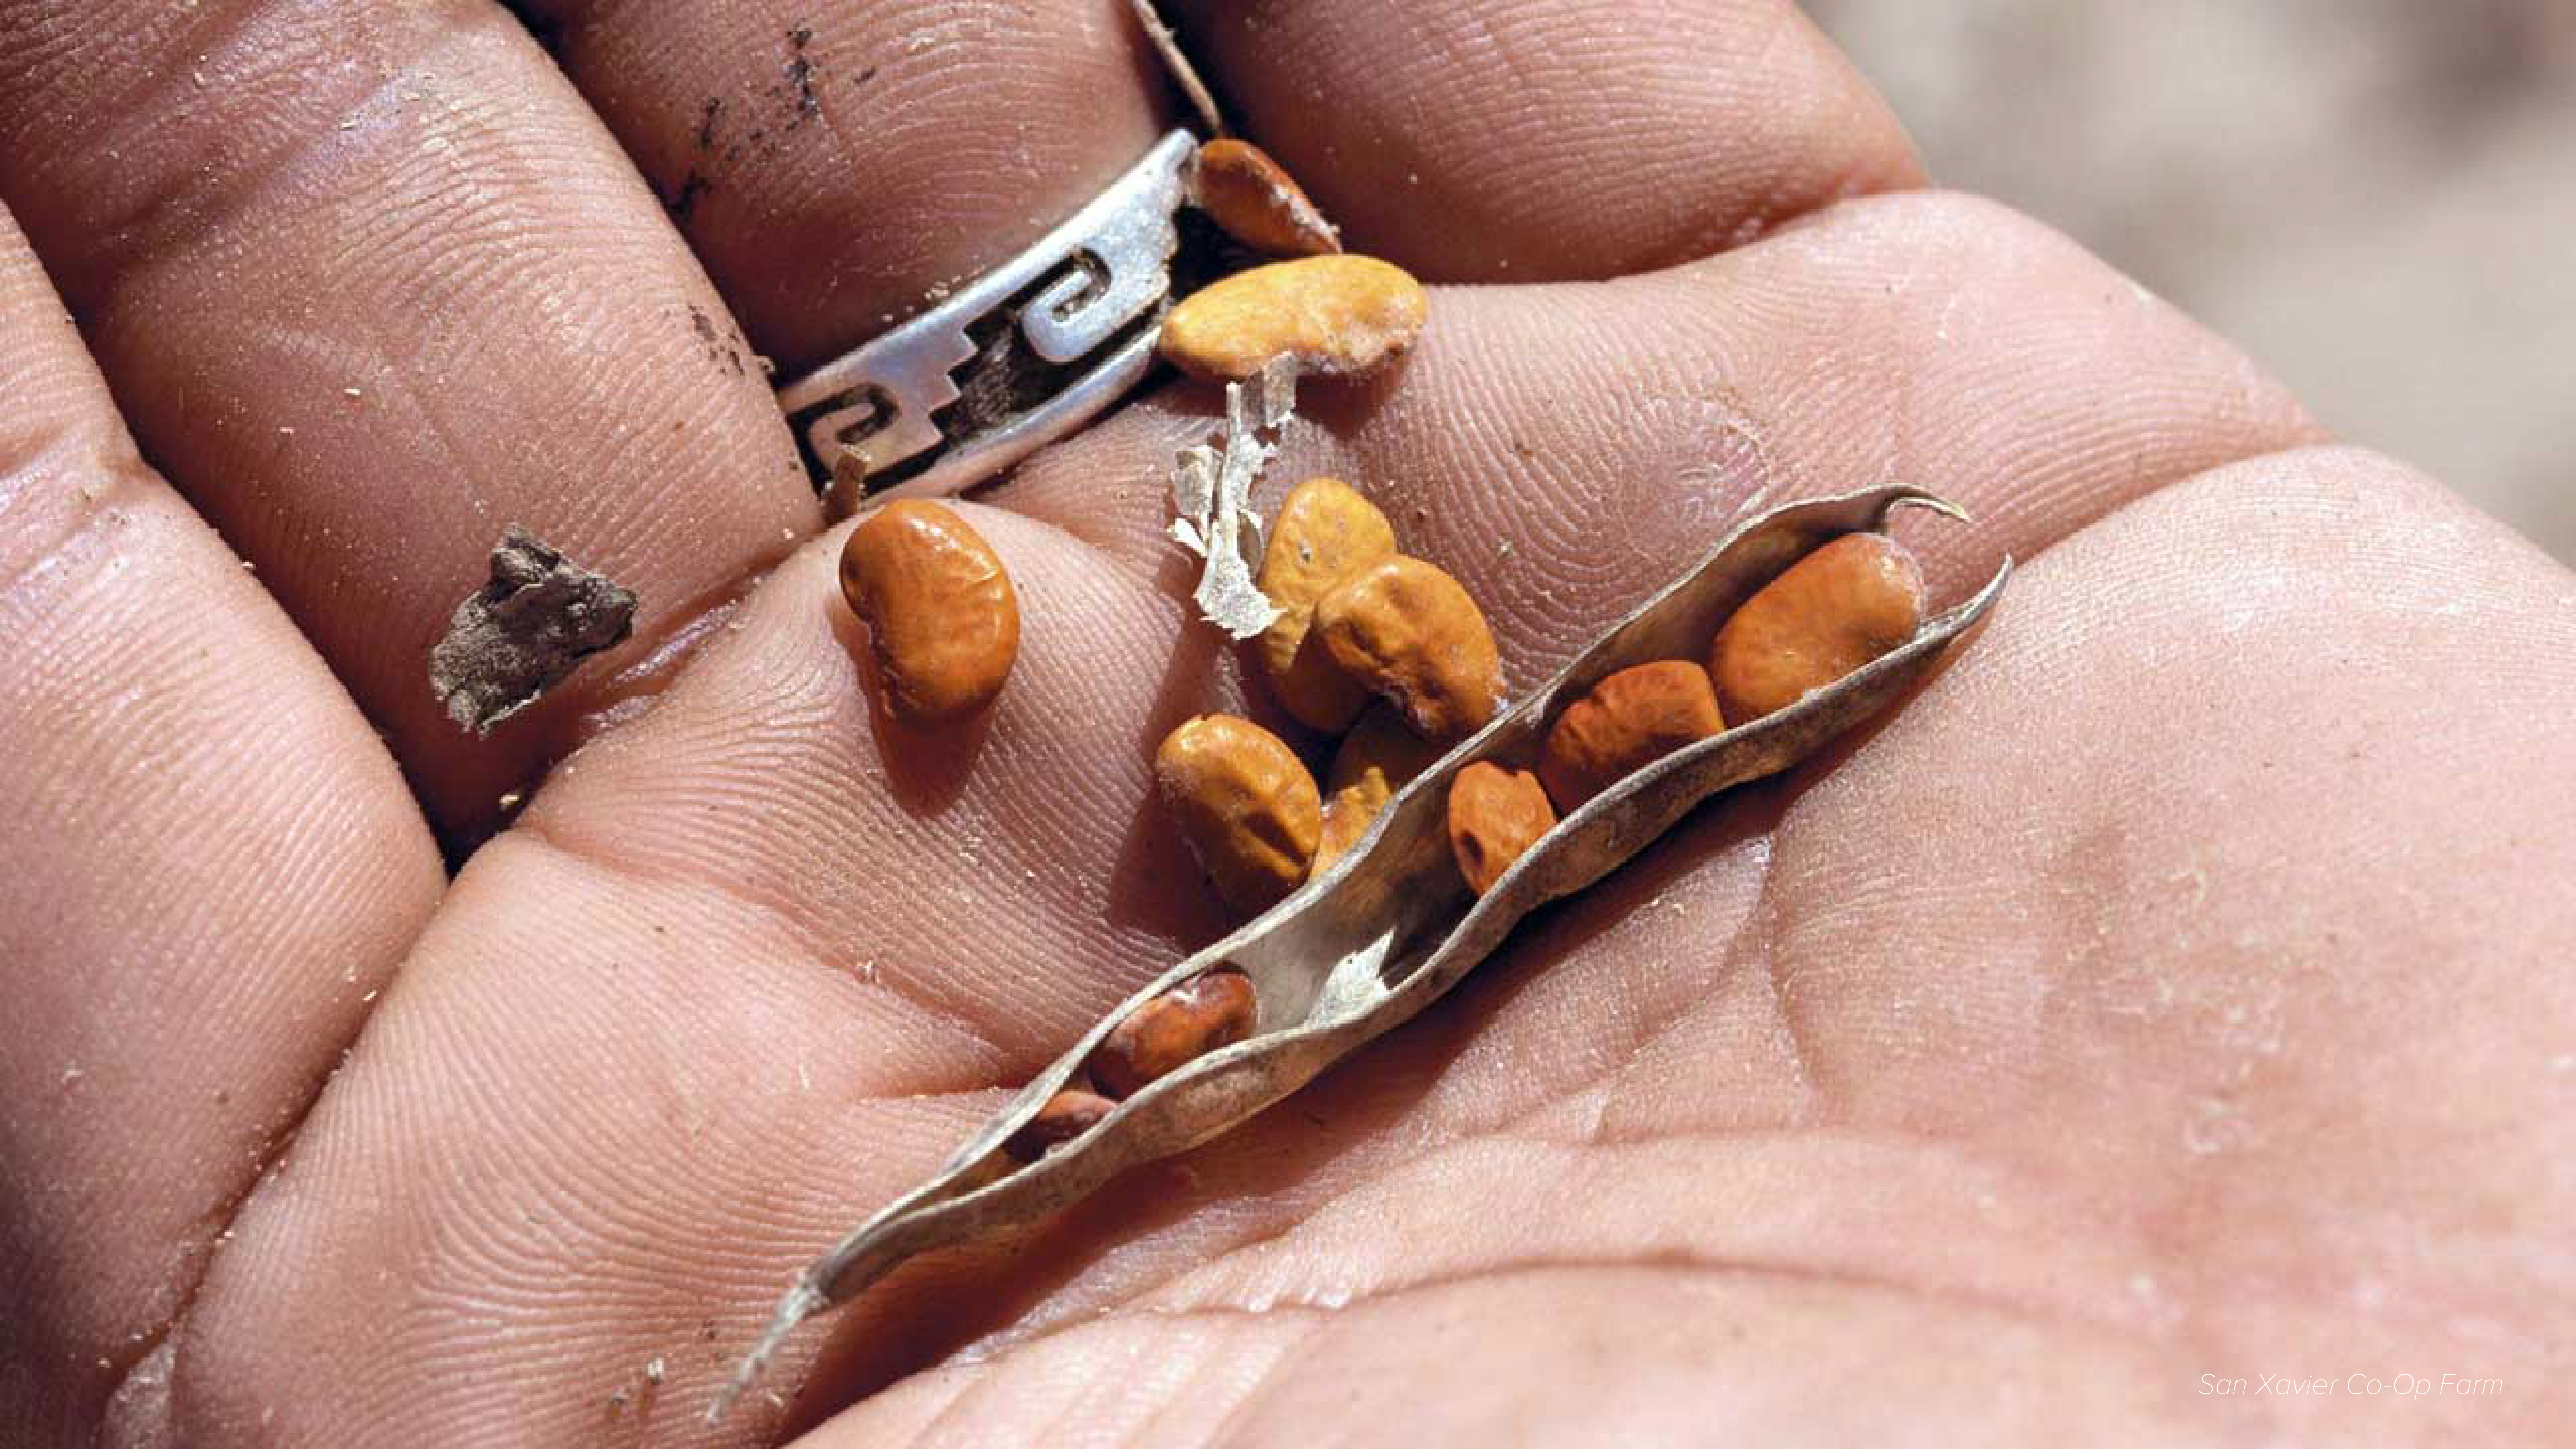 Seeds in the palm of someone's hand